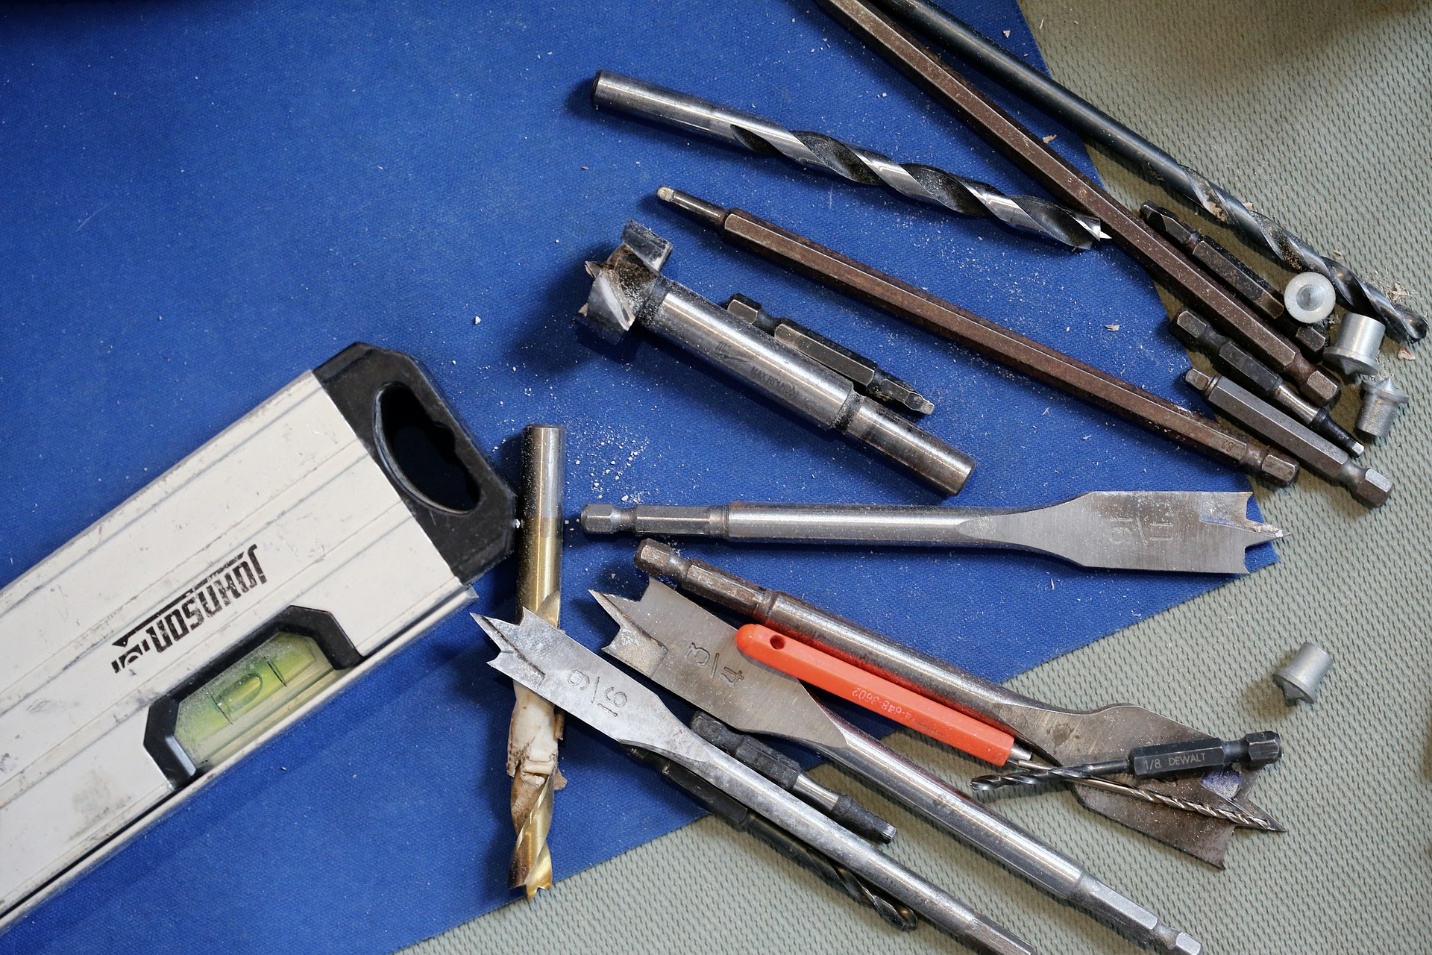 A variety of power tools are laid out on a blue surface.